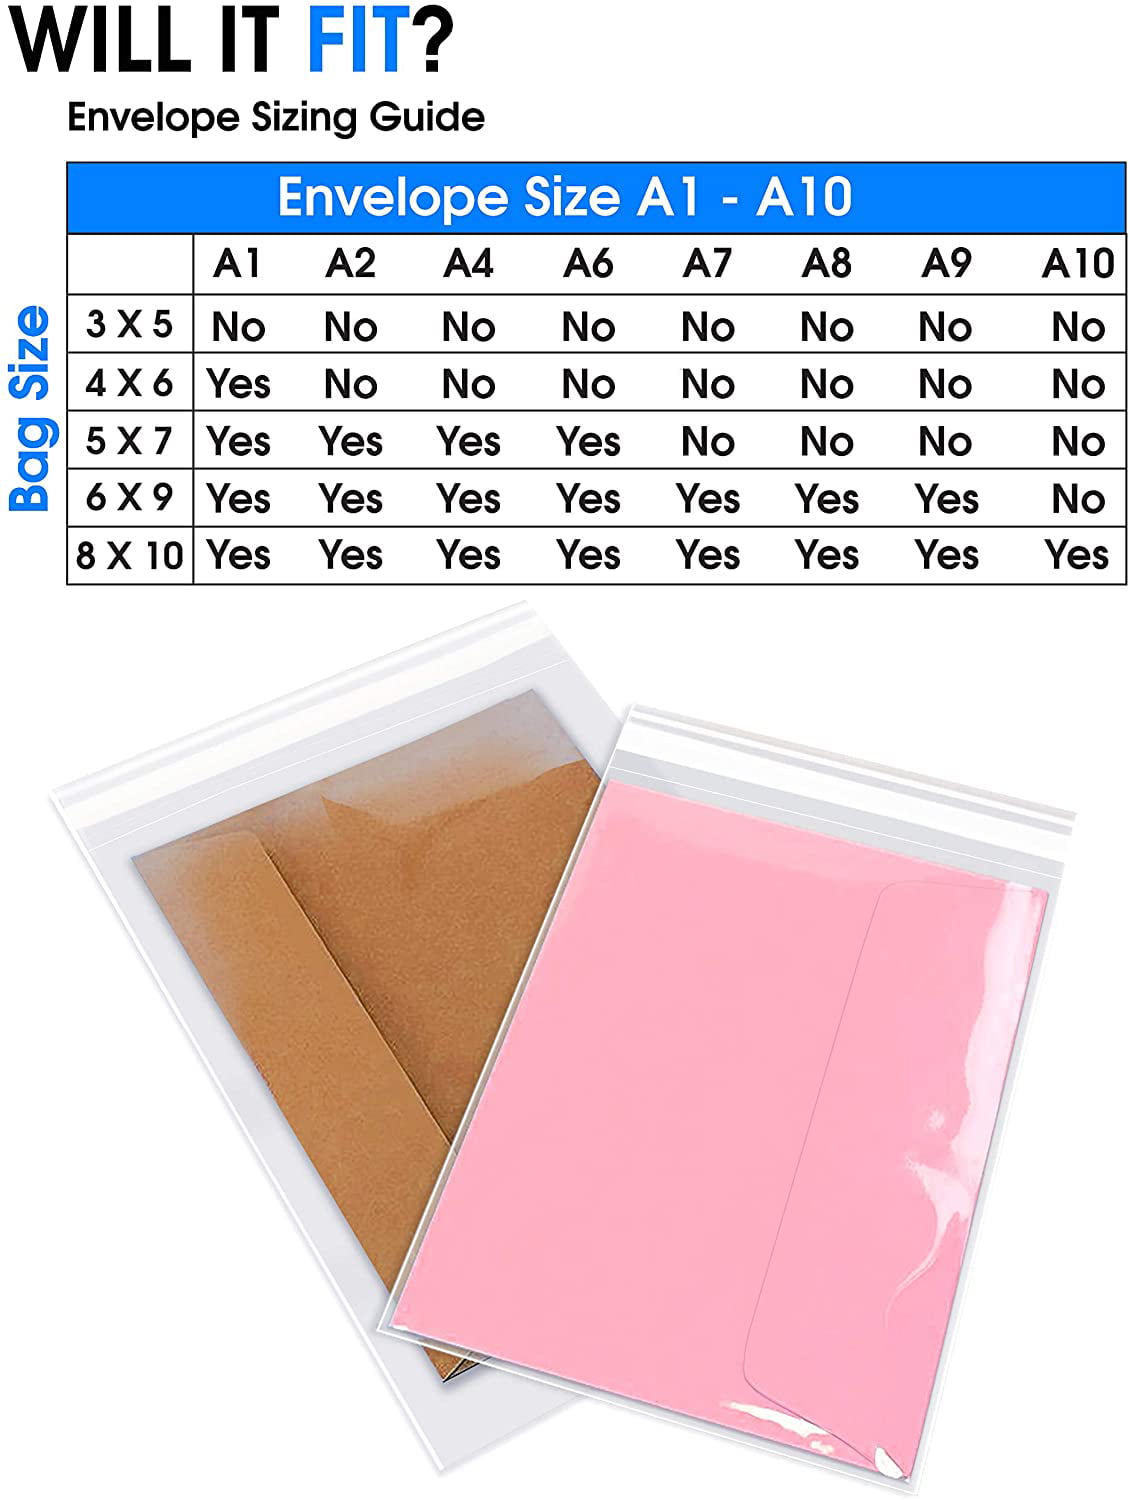 200 Pcs 4 x 6 Thick Clear Resealable Cellopane Self Adhesive Seal Bags Packaging Bakery Cookie Envelopes Photo Cards Gifts Cellophane Poly Bags 